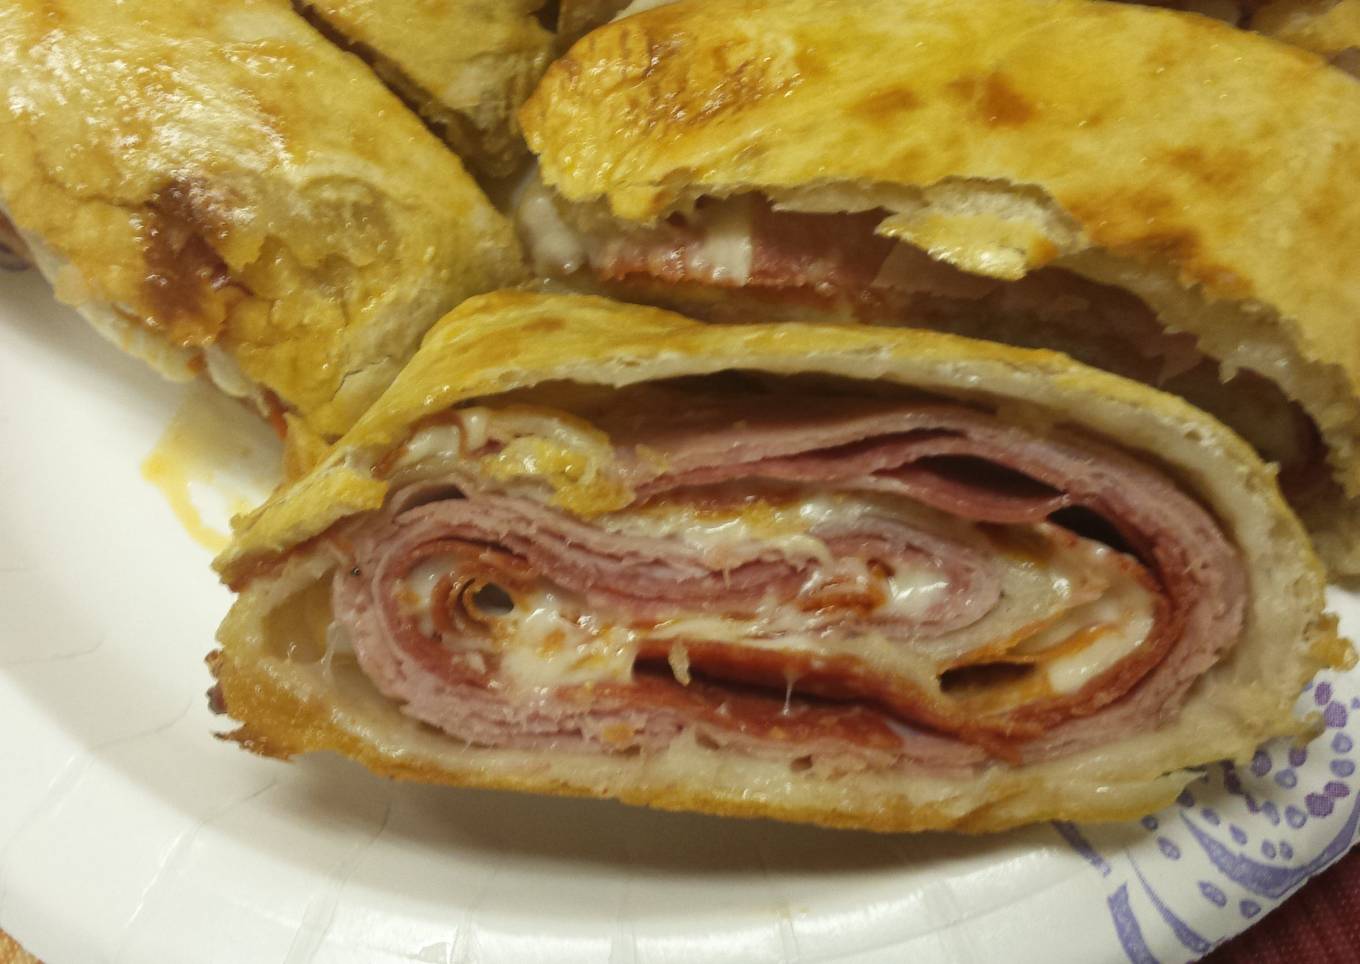 Stromboli/calzone (meat and cheese)